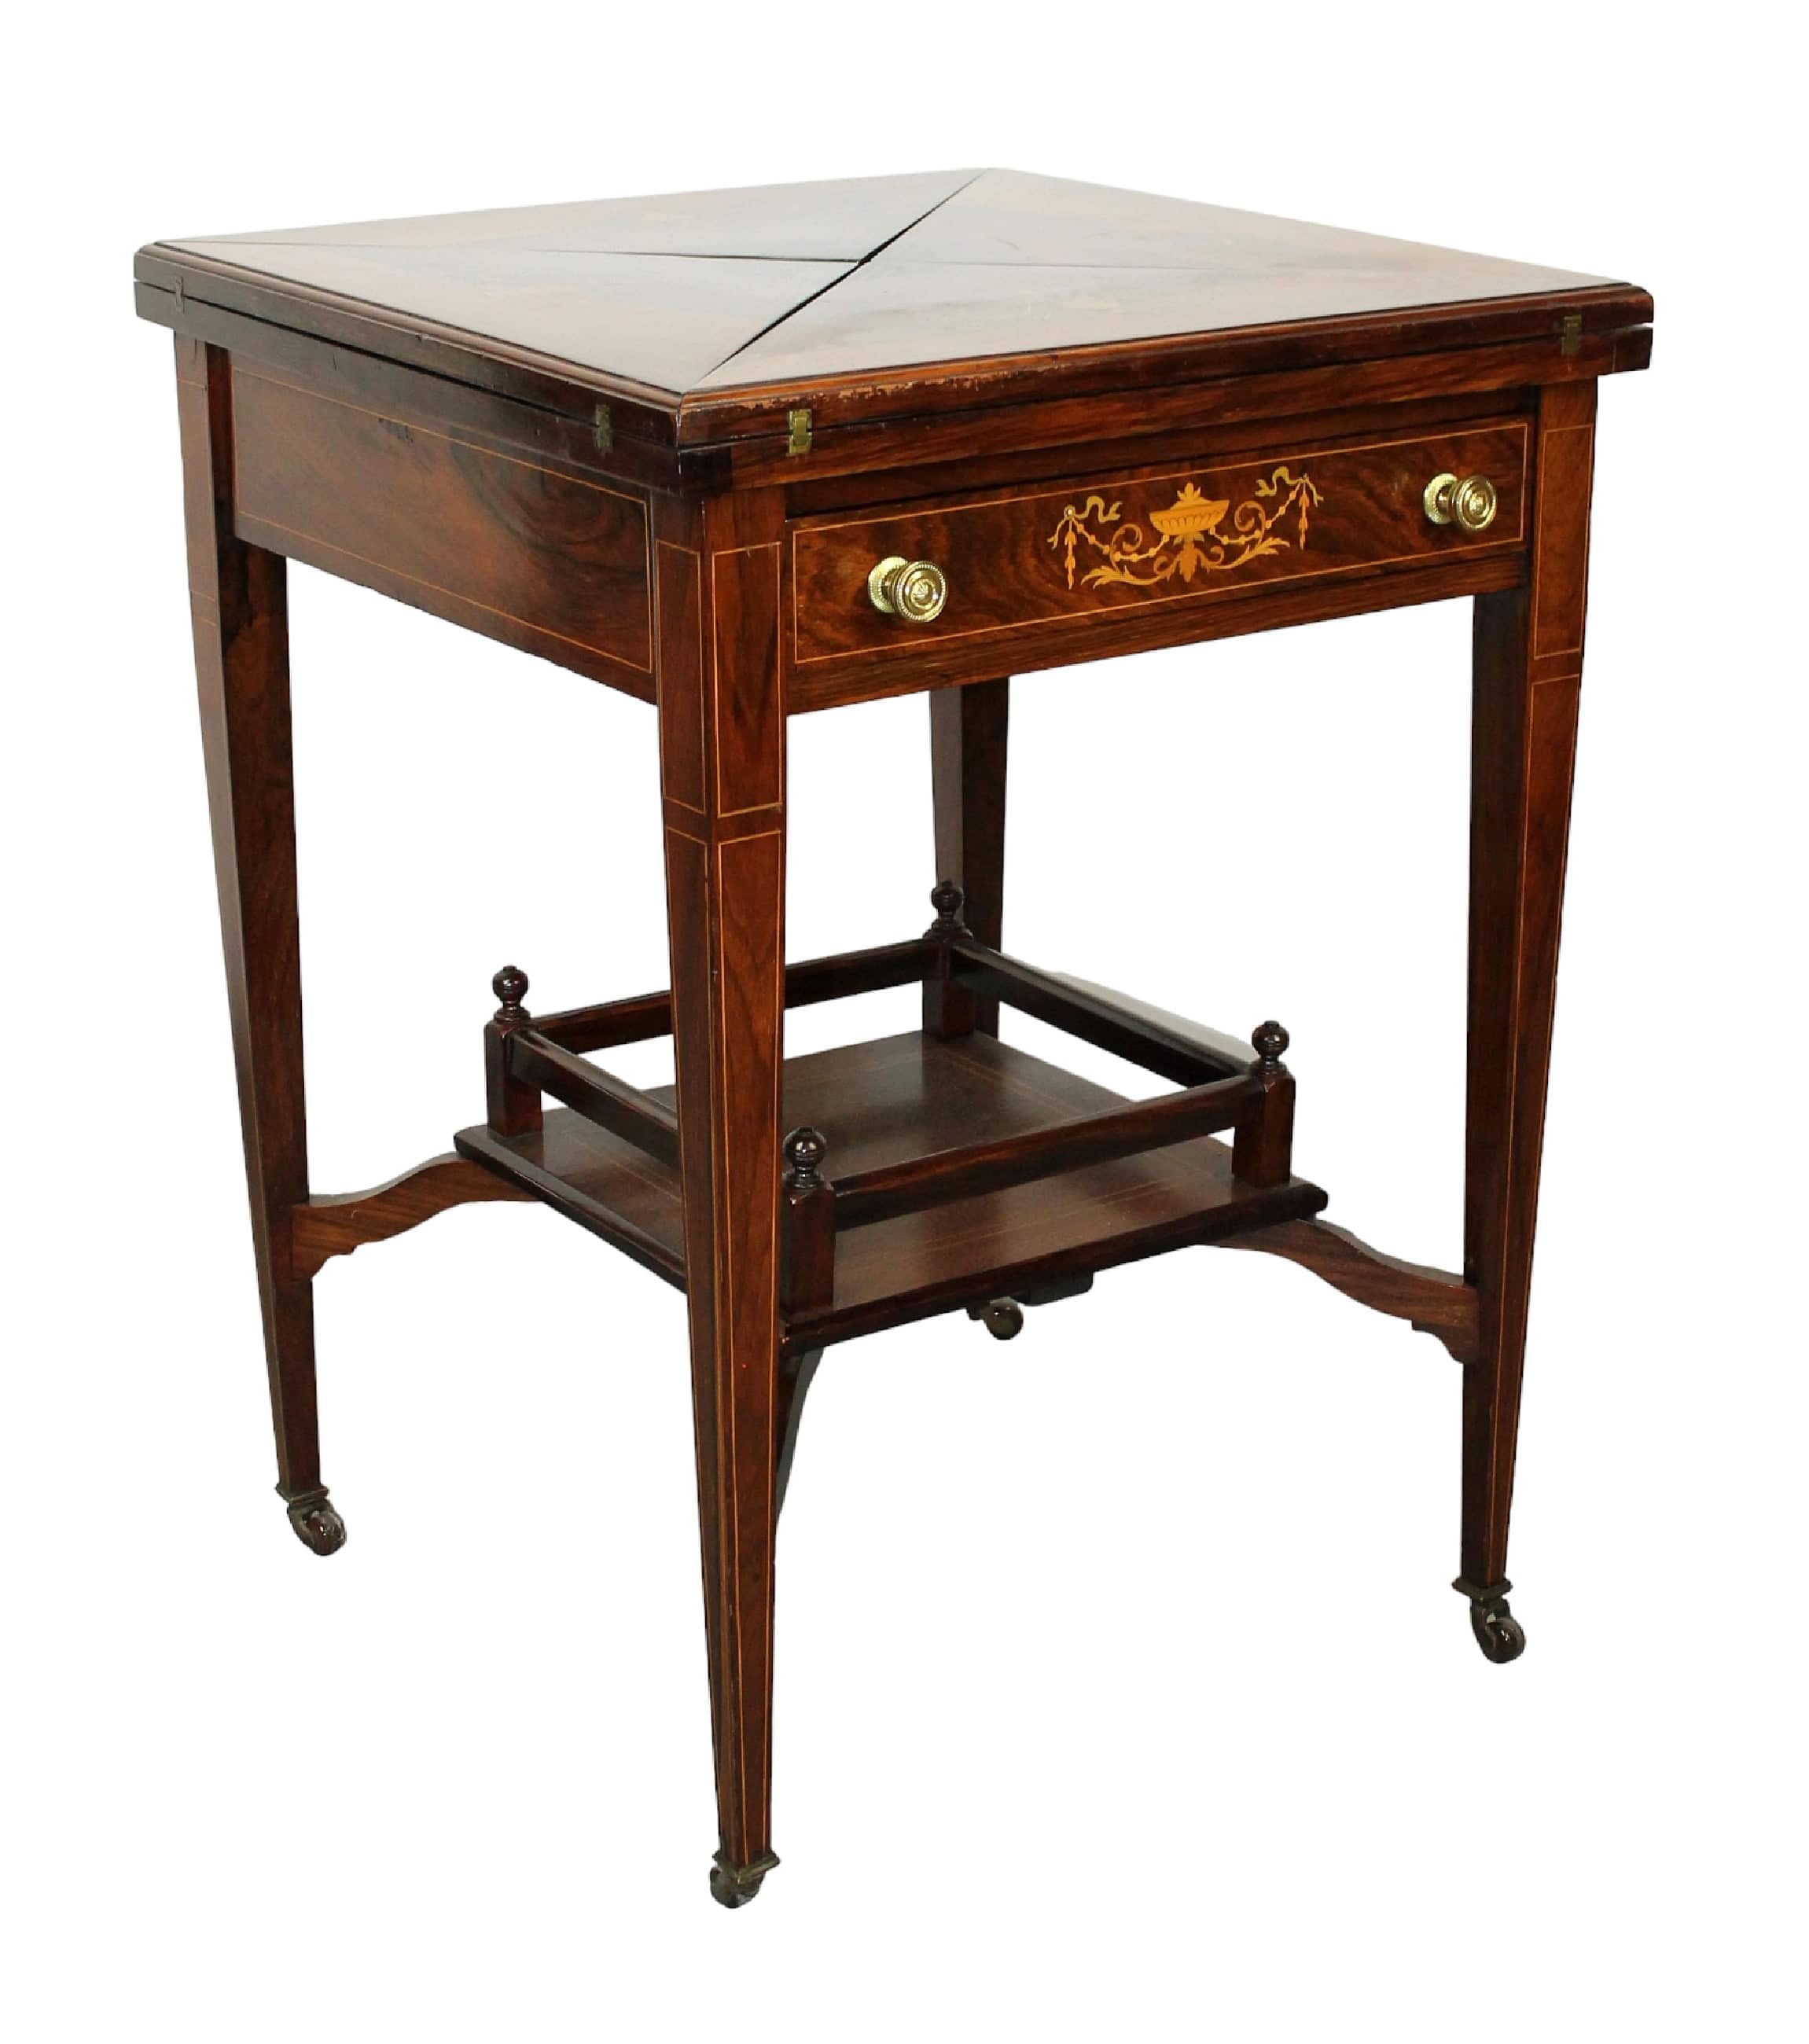 English Edwardian handkerchief game table with marquetry top